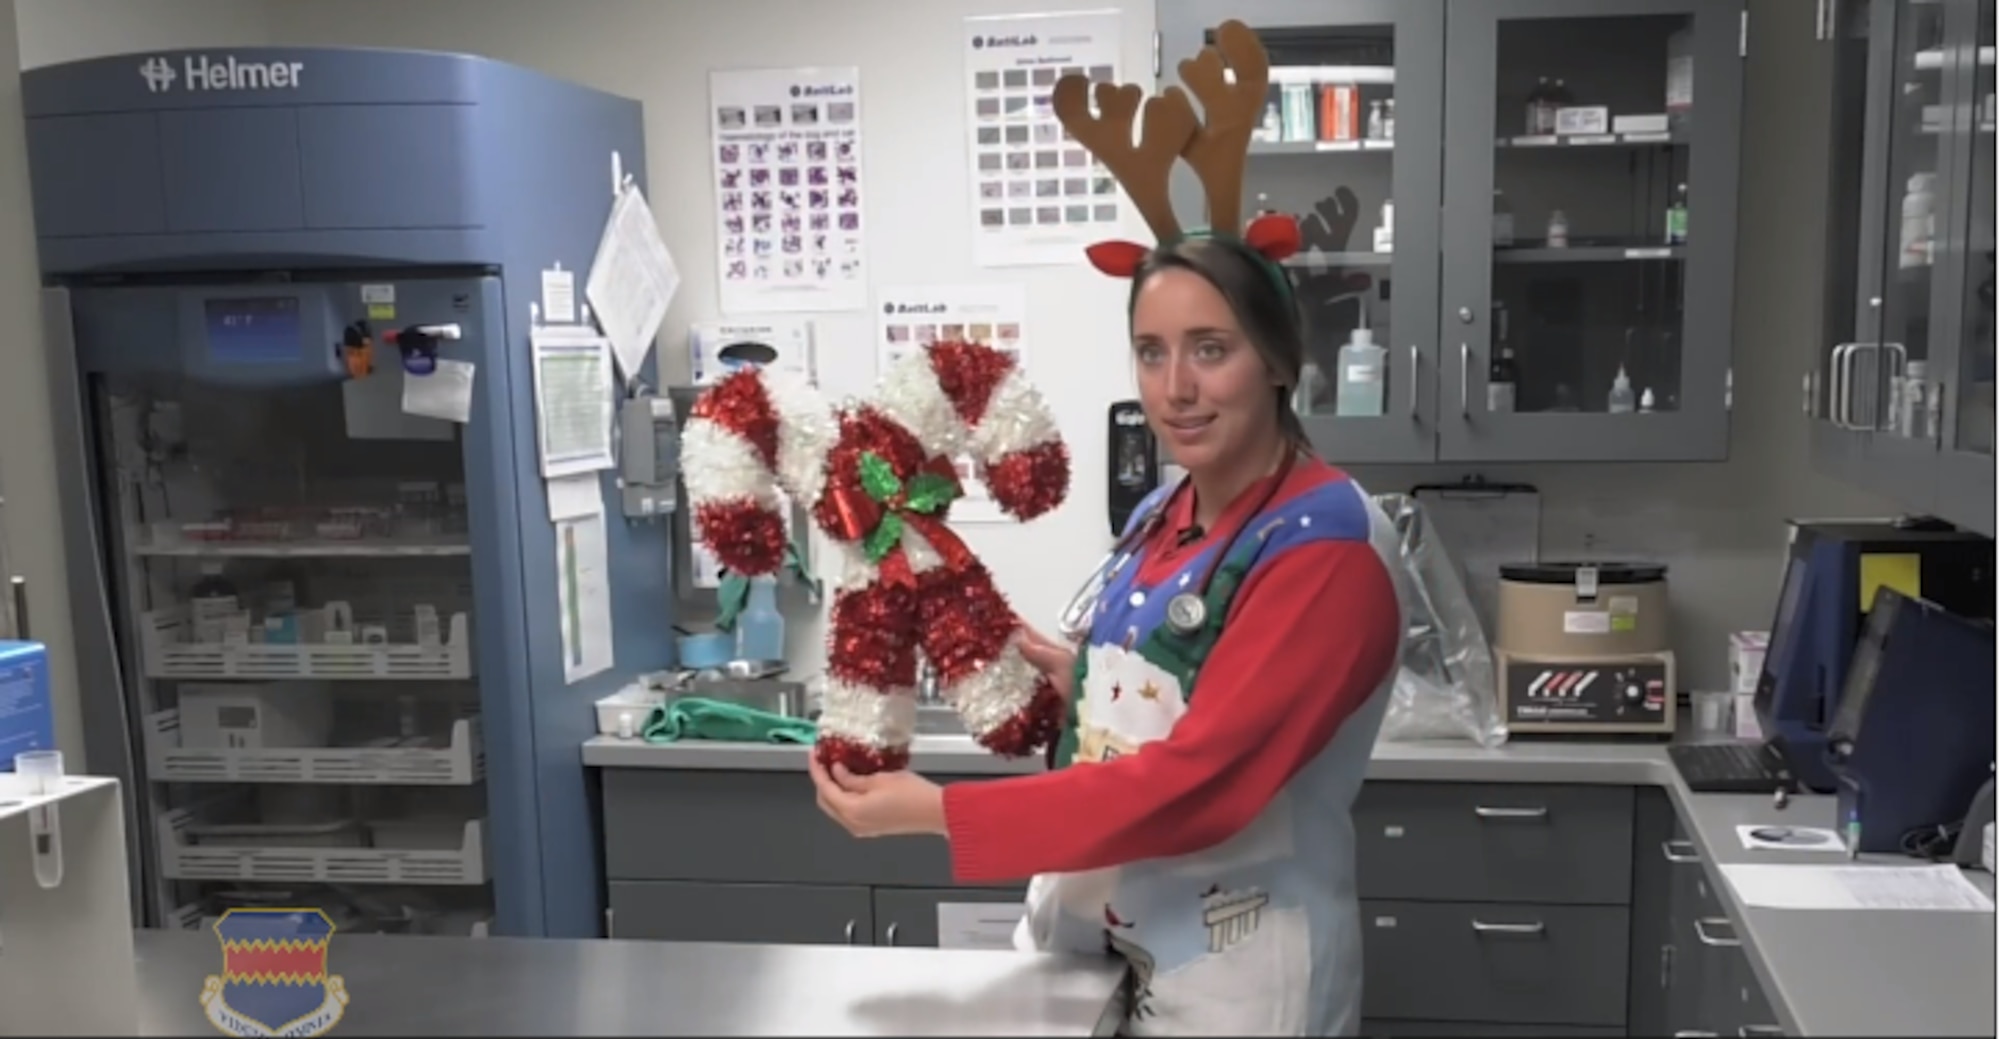 Female stands in medical office holding holiday decorations